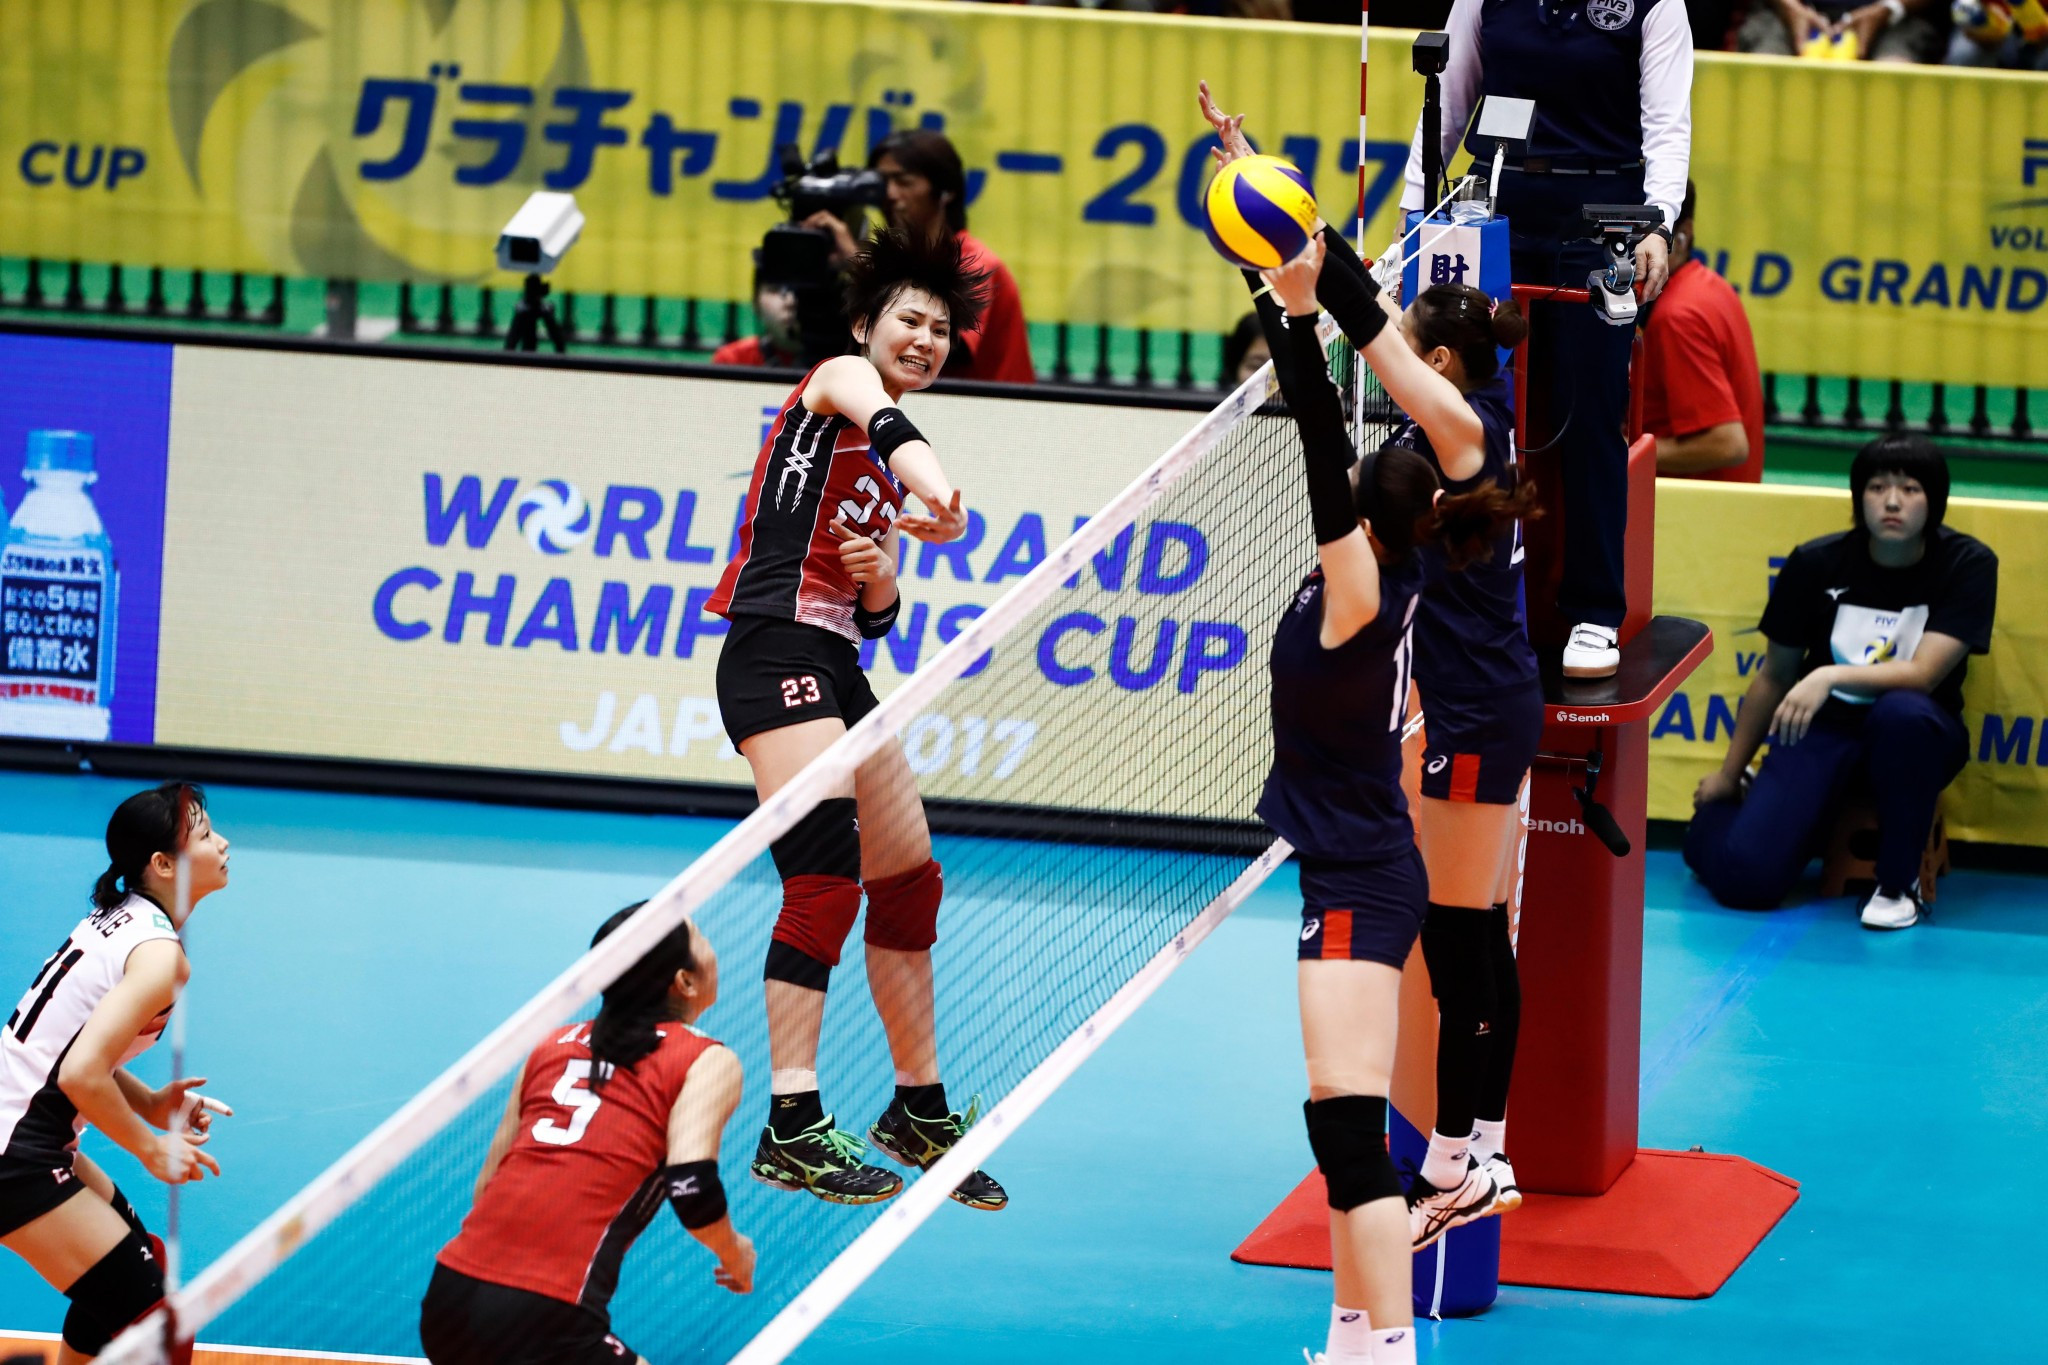 Japan won in straight sets on home soil against South Korea ©FIVB